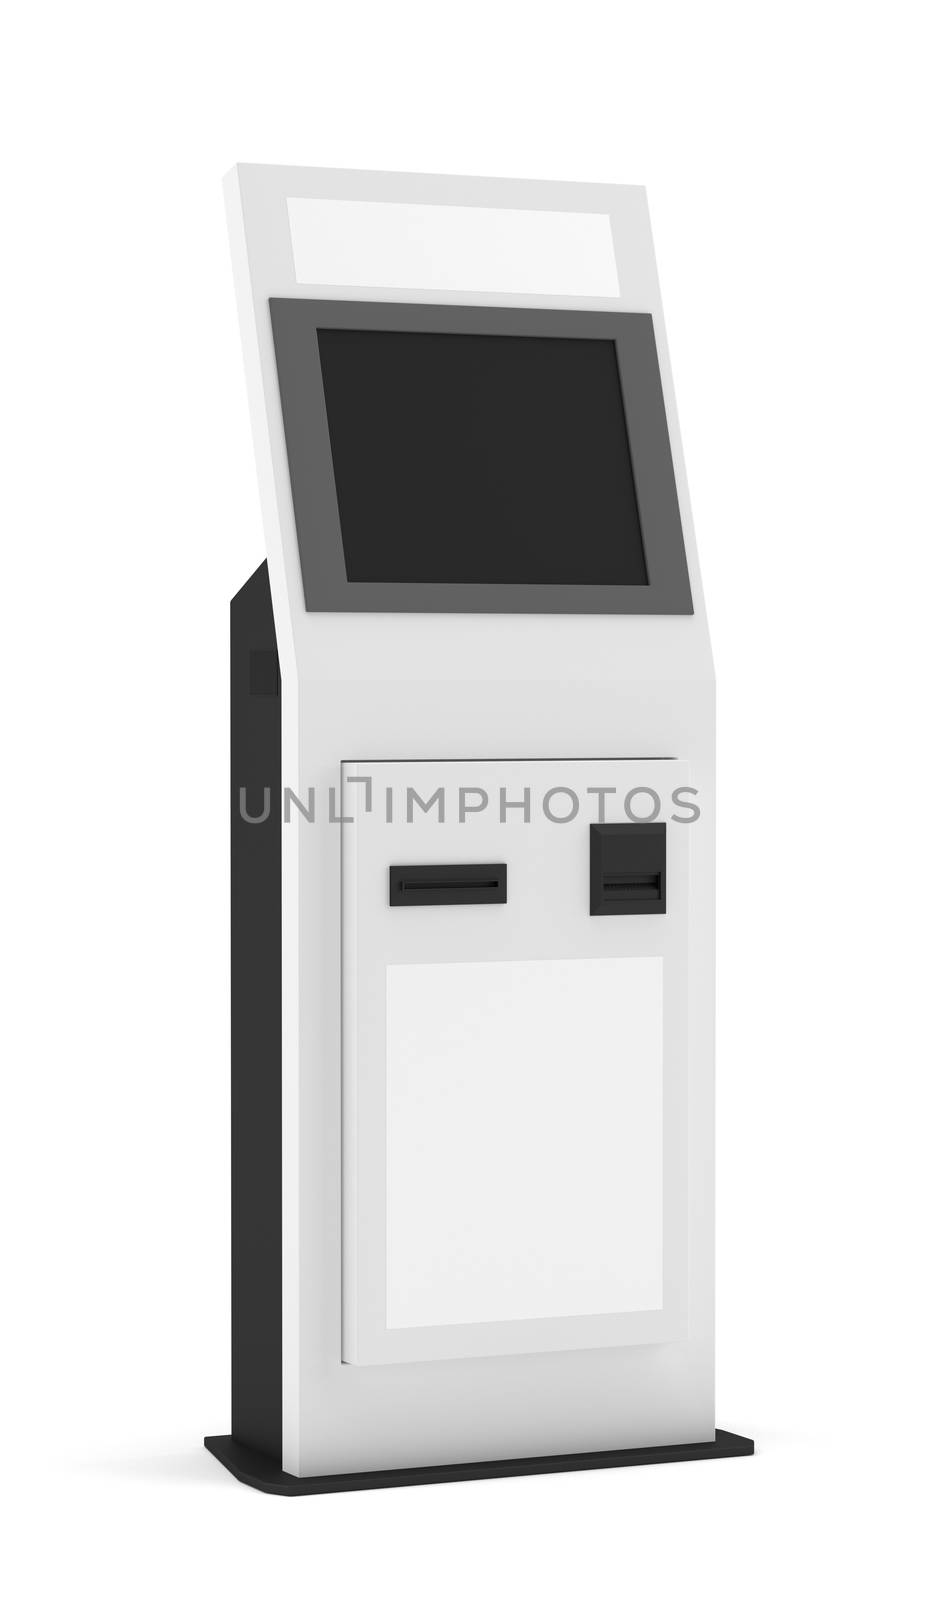 Digital touchscreen terminal isolated on white background. 3D illustration